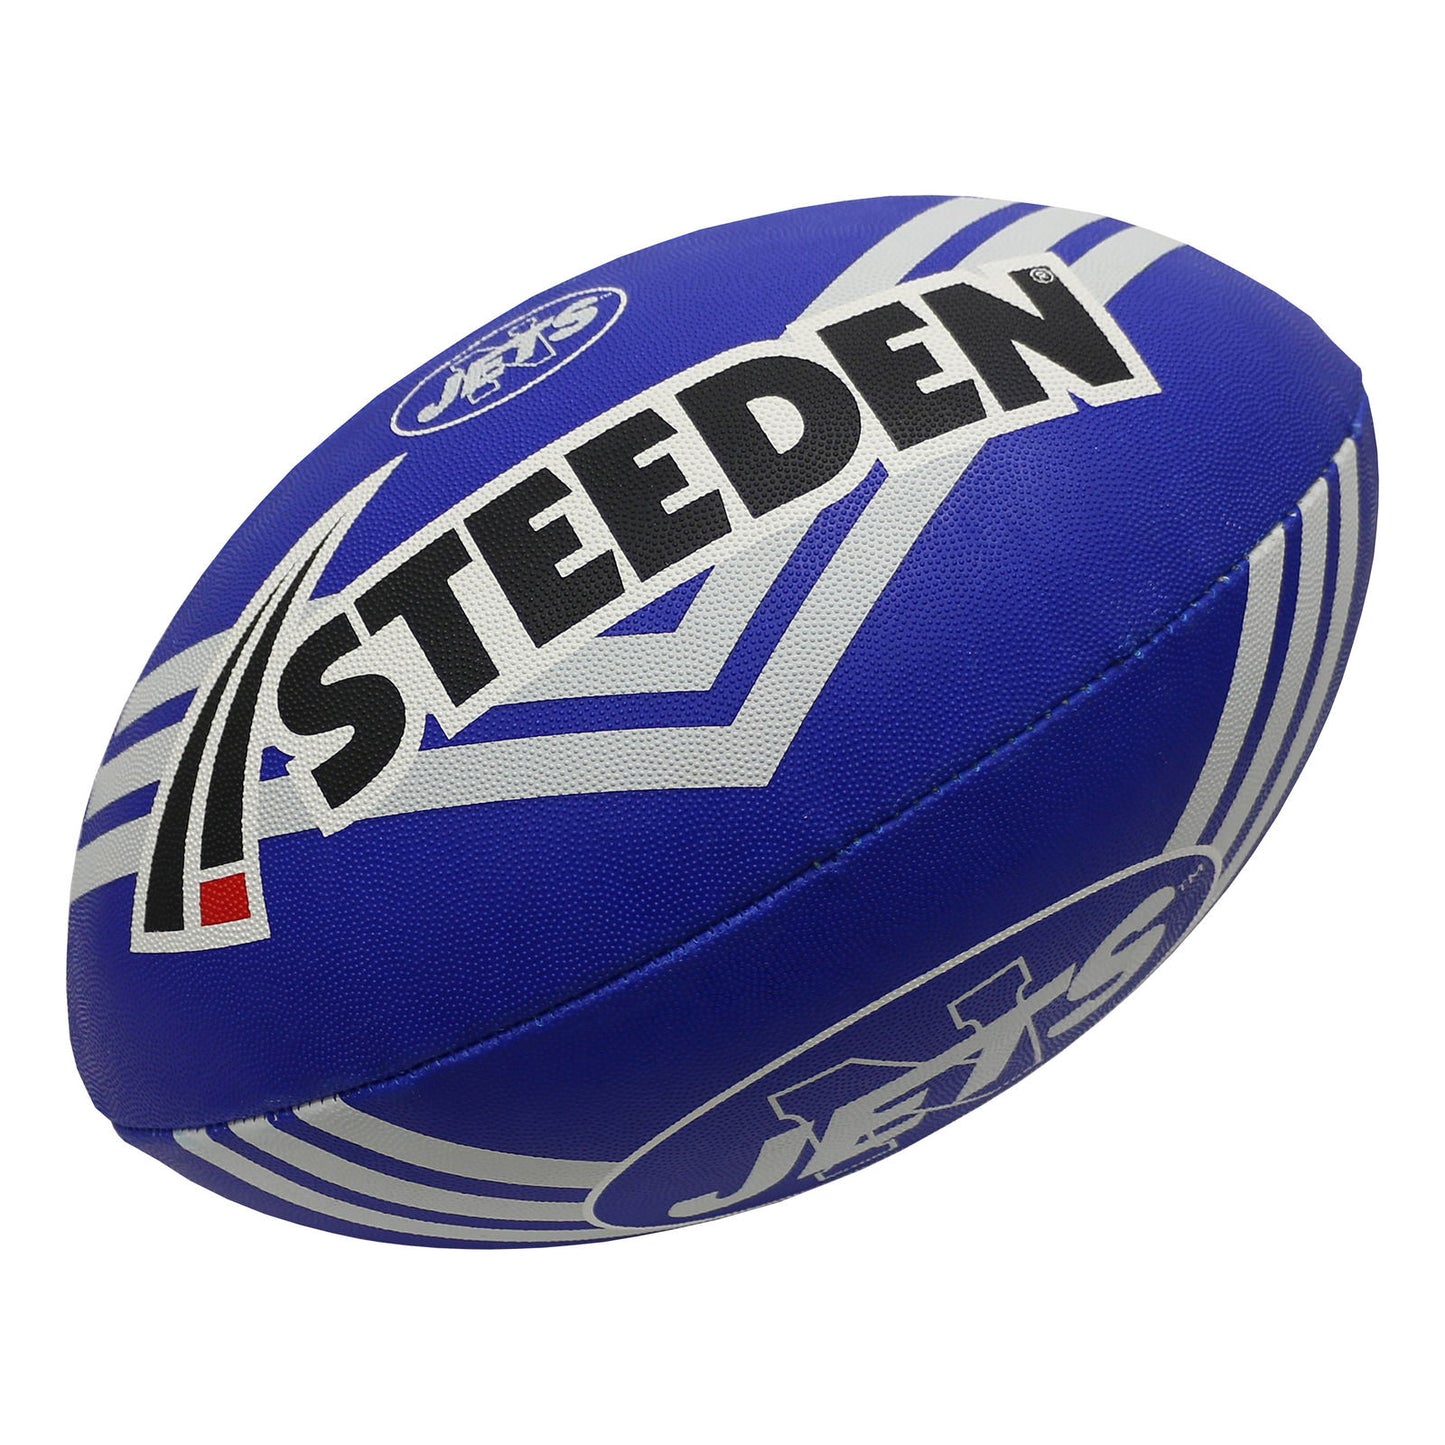 Newtown Jets Supporter Football Size 5